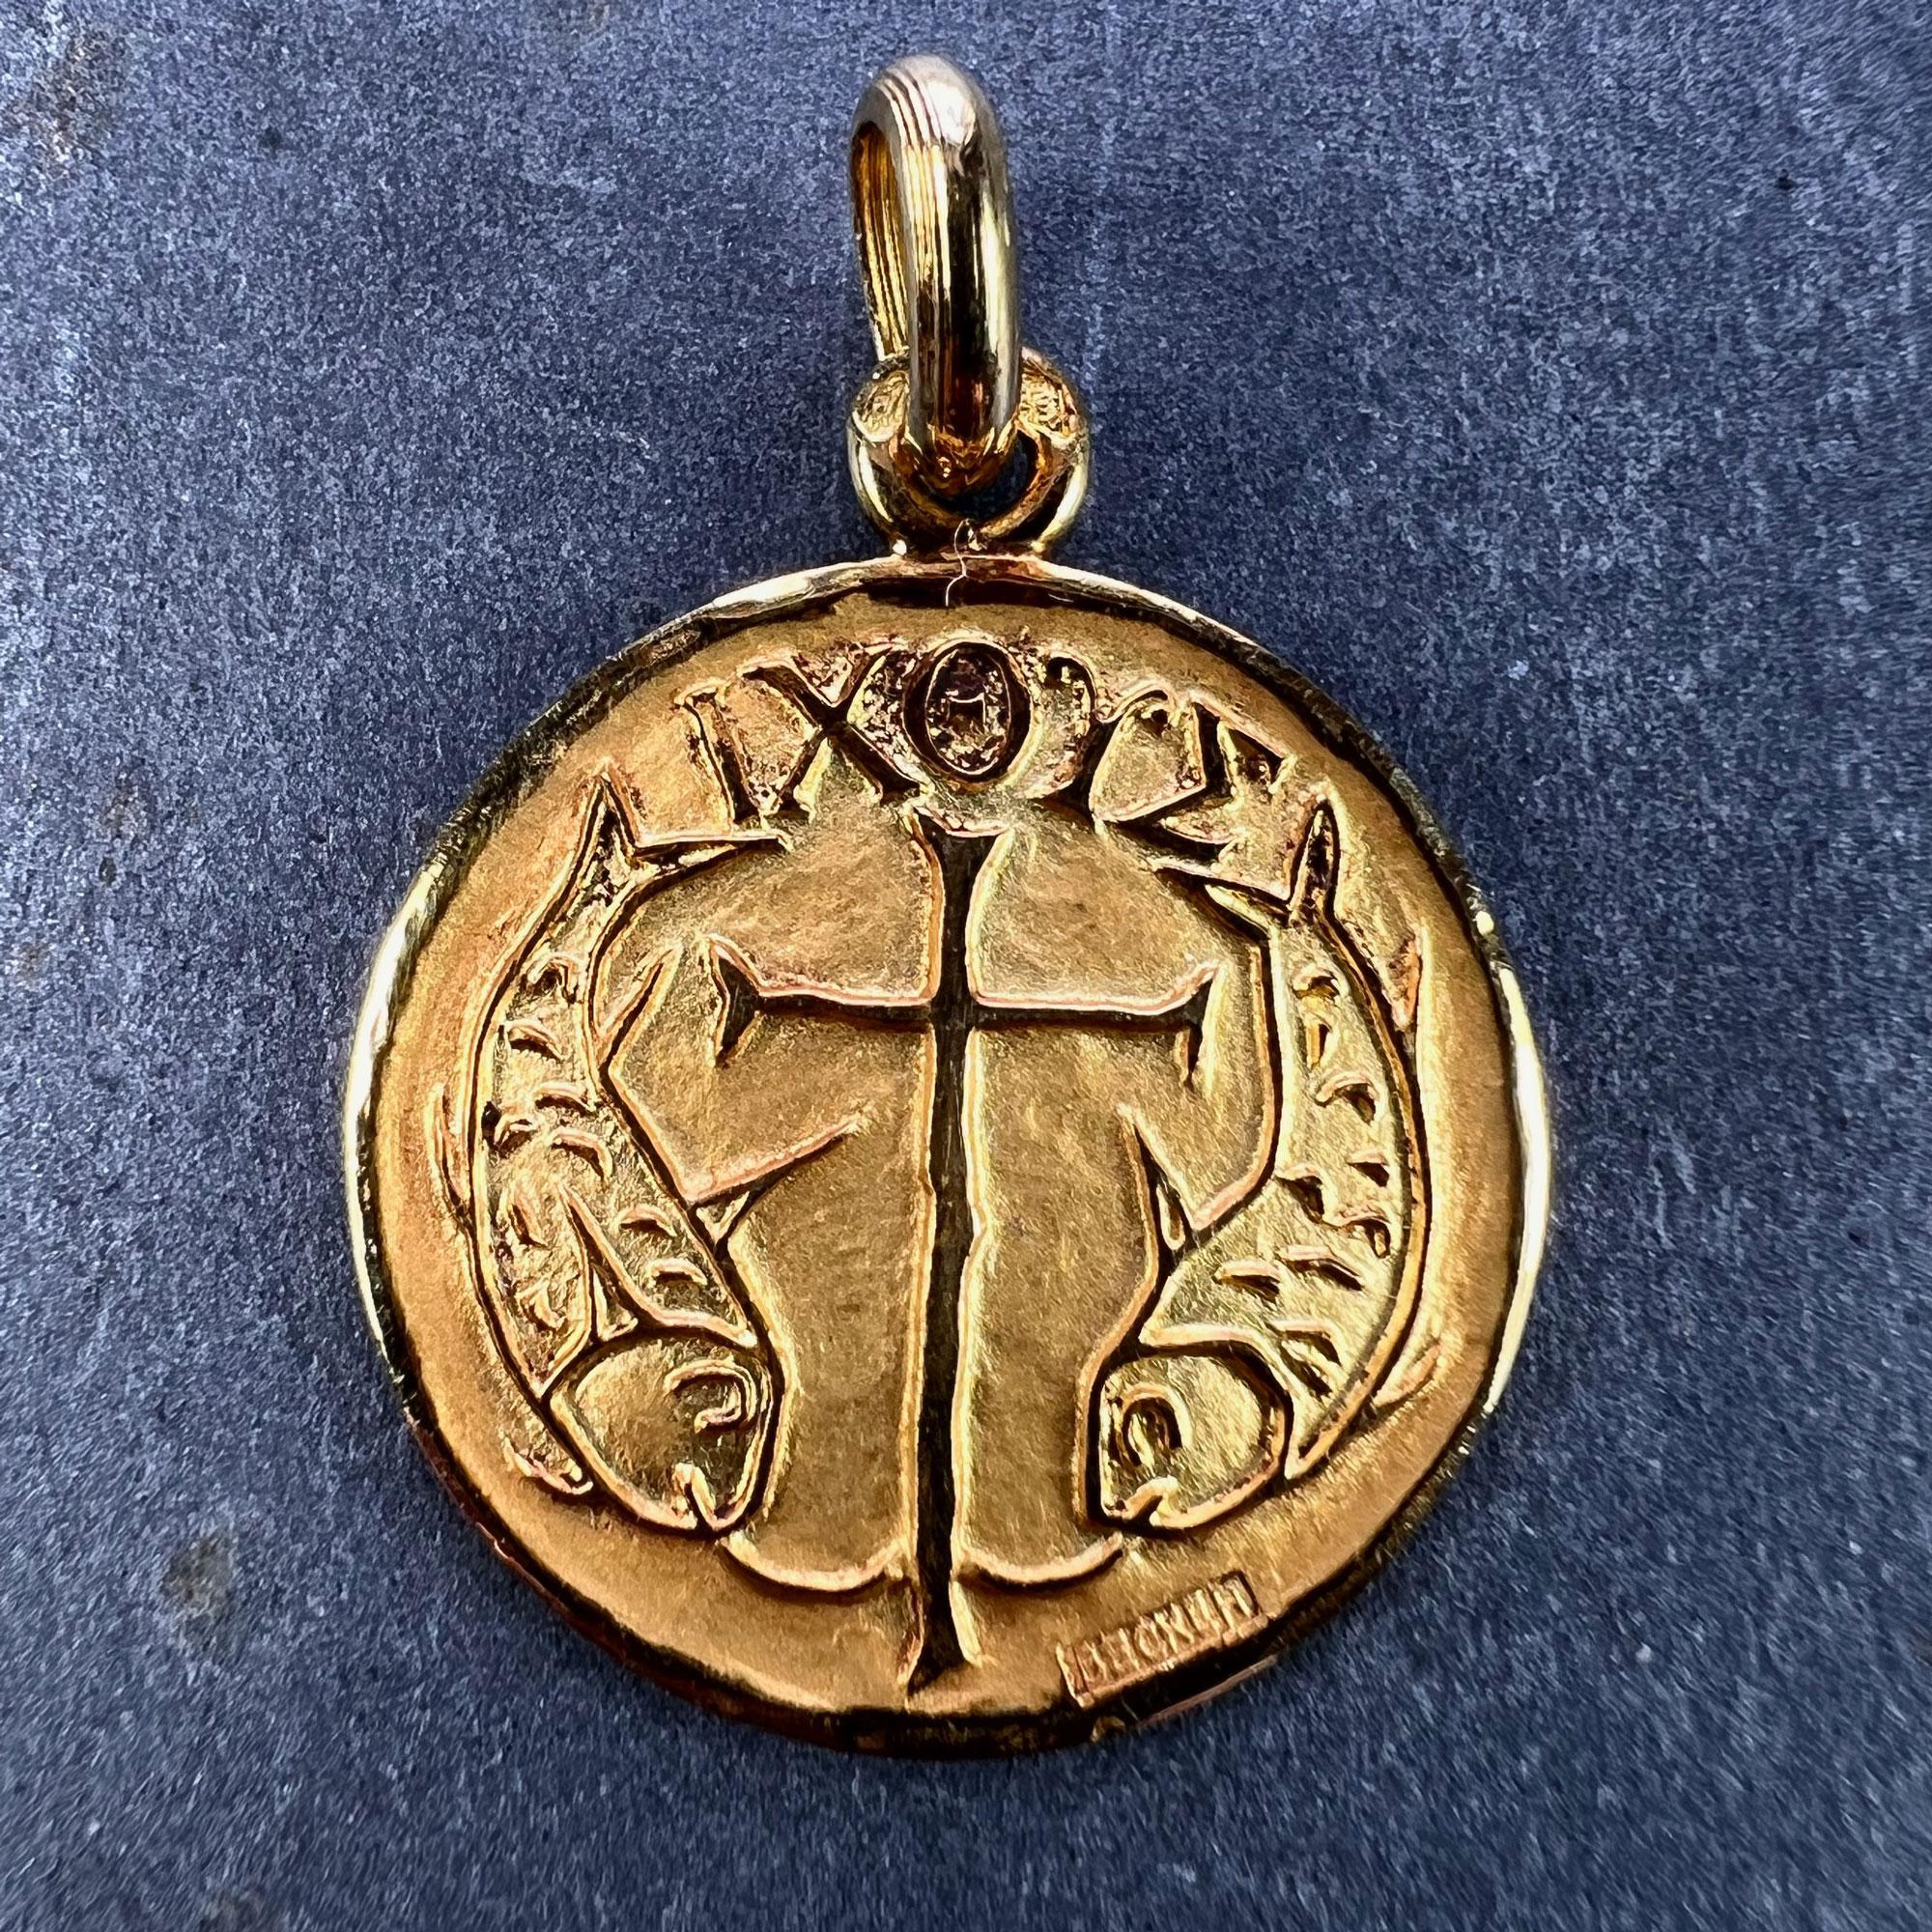 A French 18 karat (18K) yellow gold religious charm pendant depicting a pair of fish surrounding a cross, with the word IXOYE above. Signed Becker and stamped with the eagle's head for French manufacture and 18 karat gold with an unknown maker’s